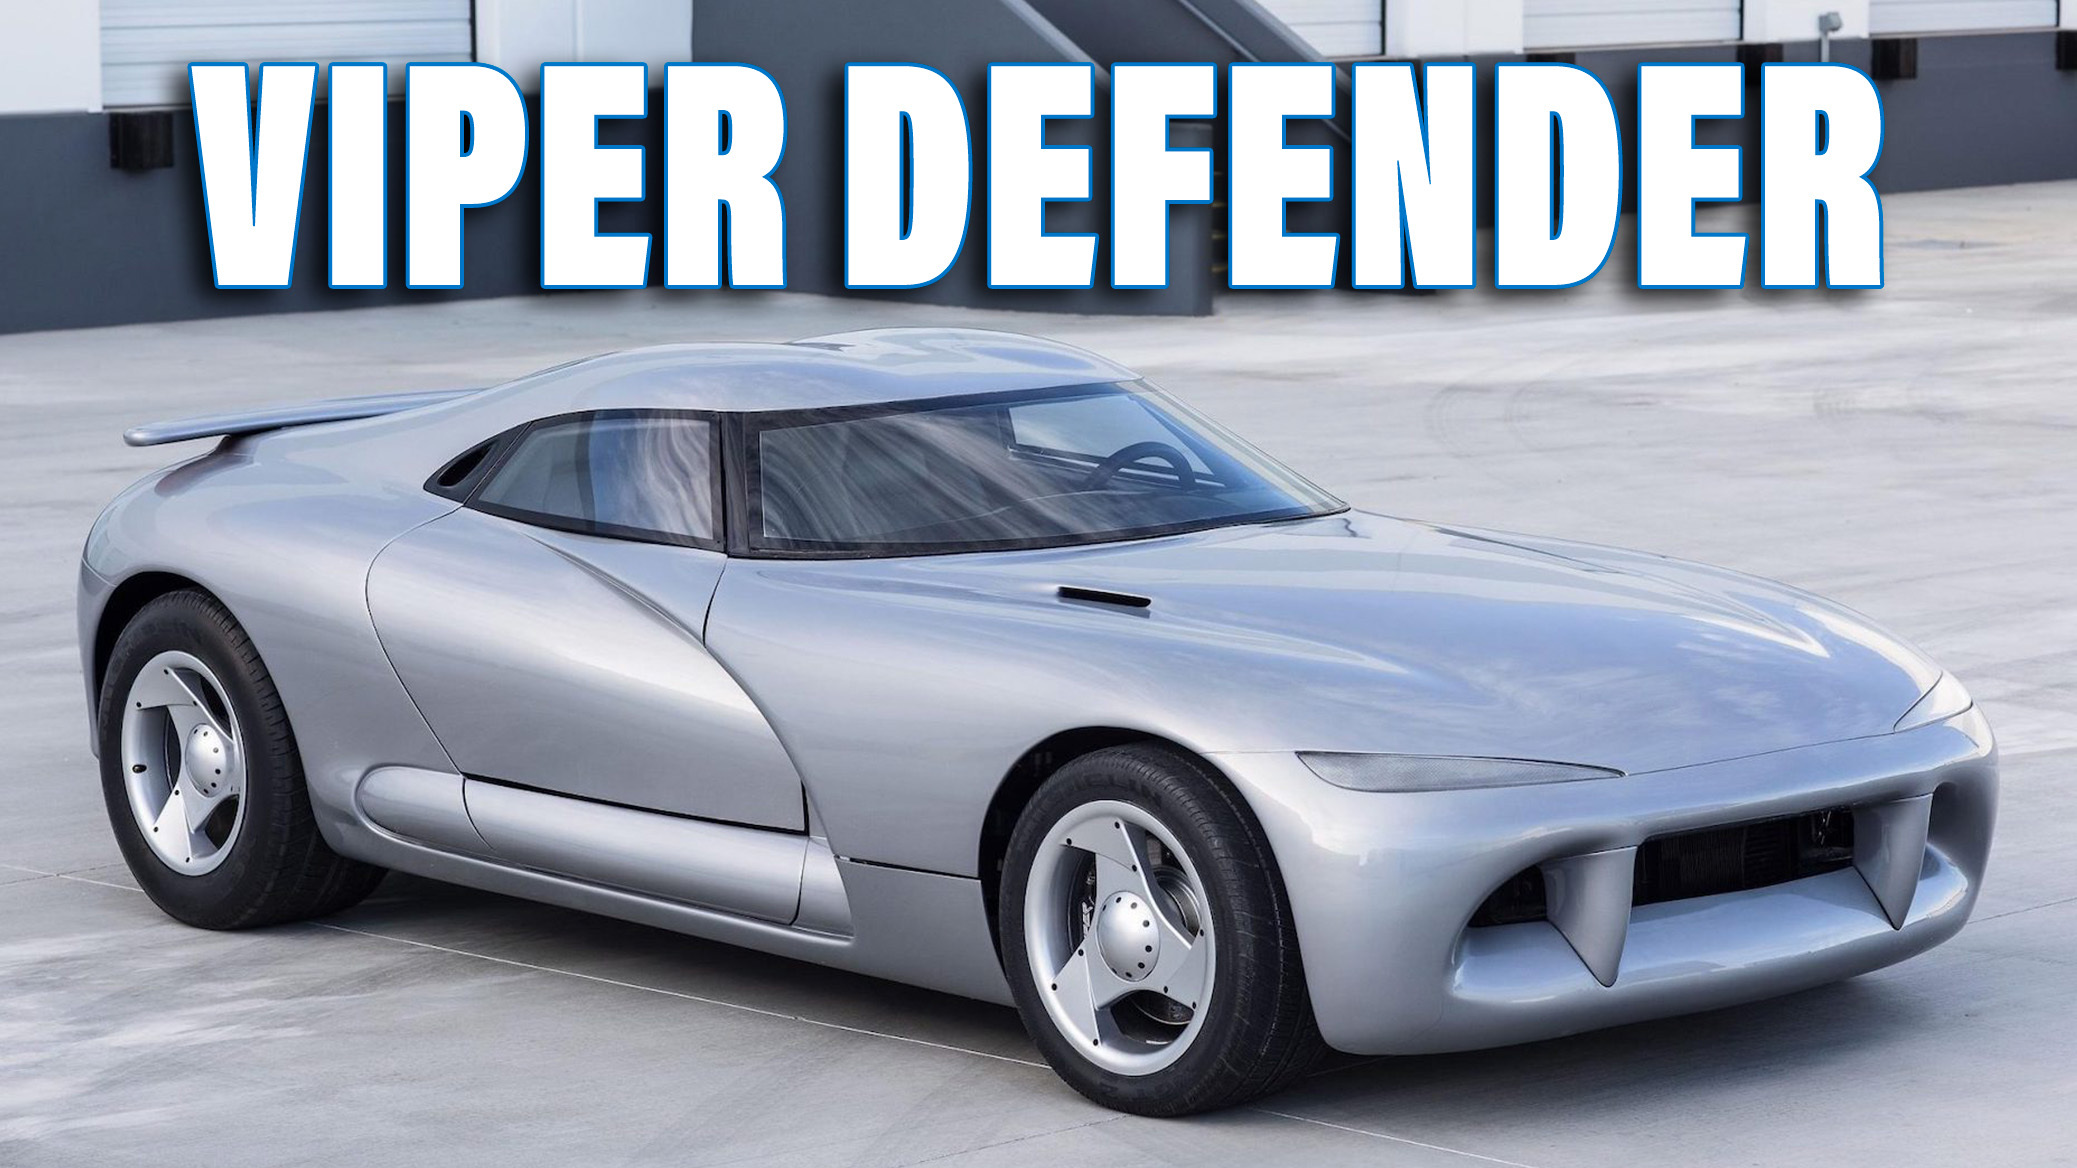 This Viper Defender Was A 1990s Tv Star But Its Short On Venom